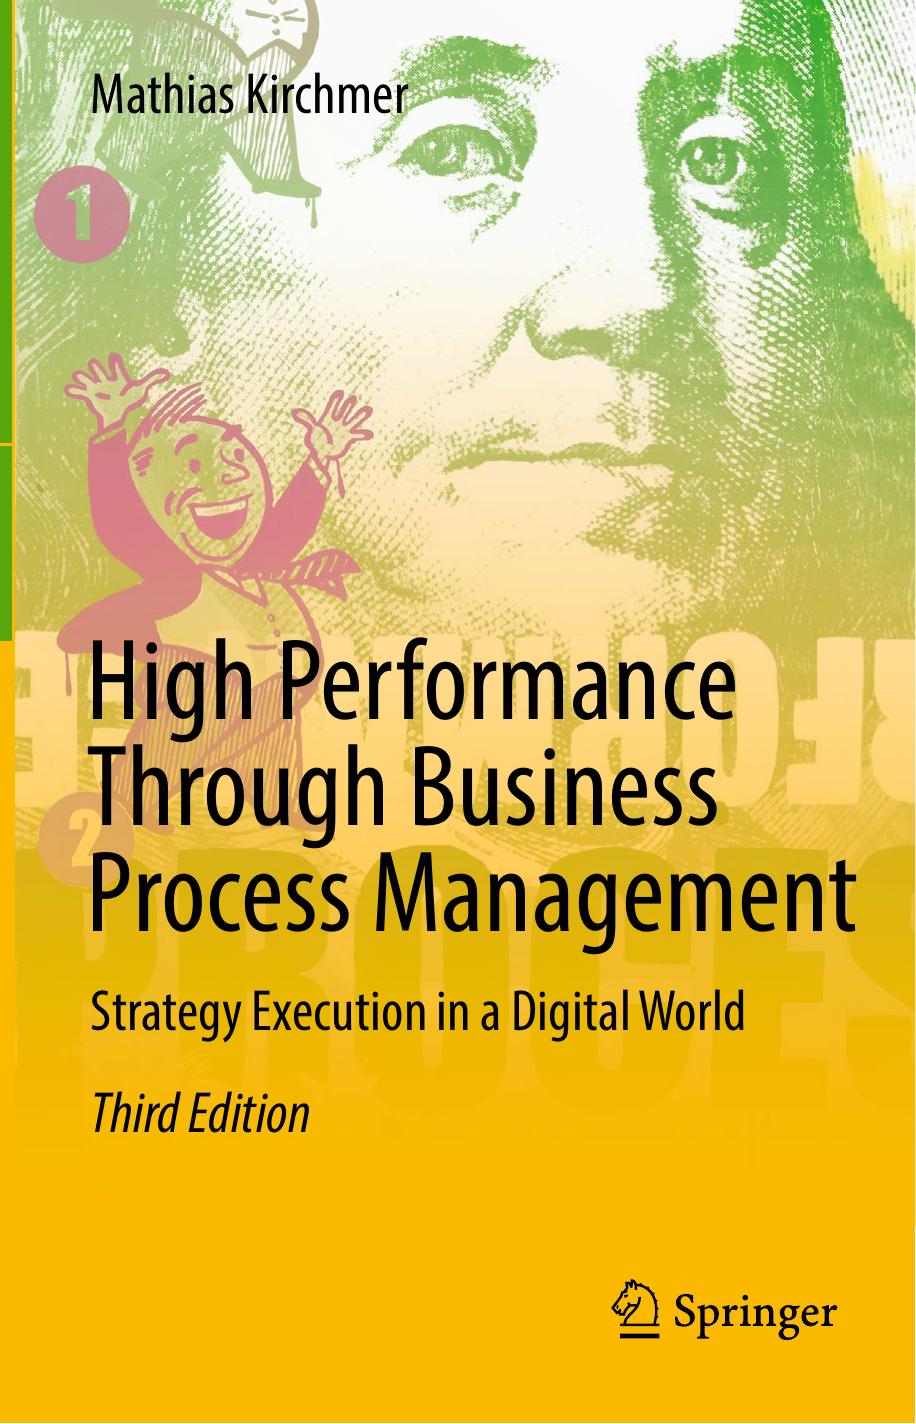 High Performance Through Business Process Management: Strategy Execution in a Digital World